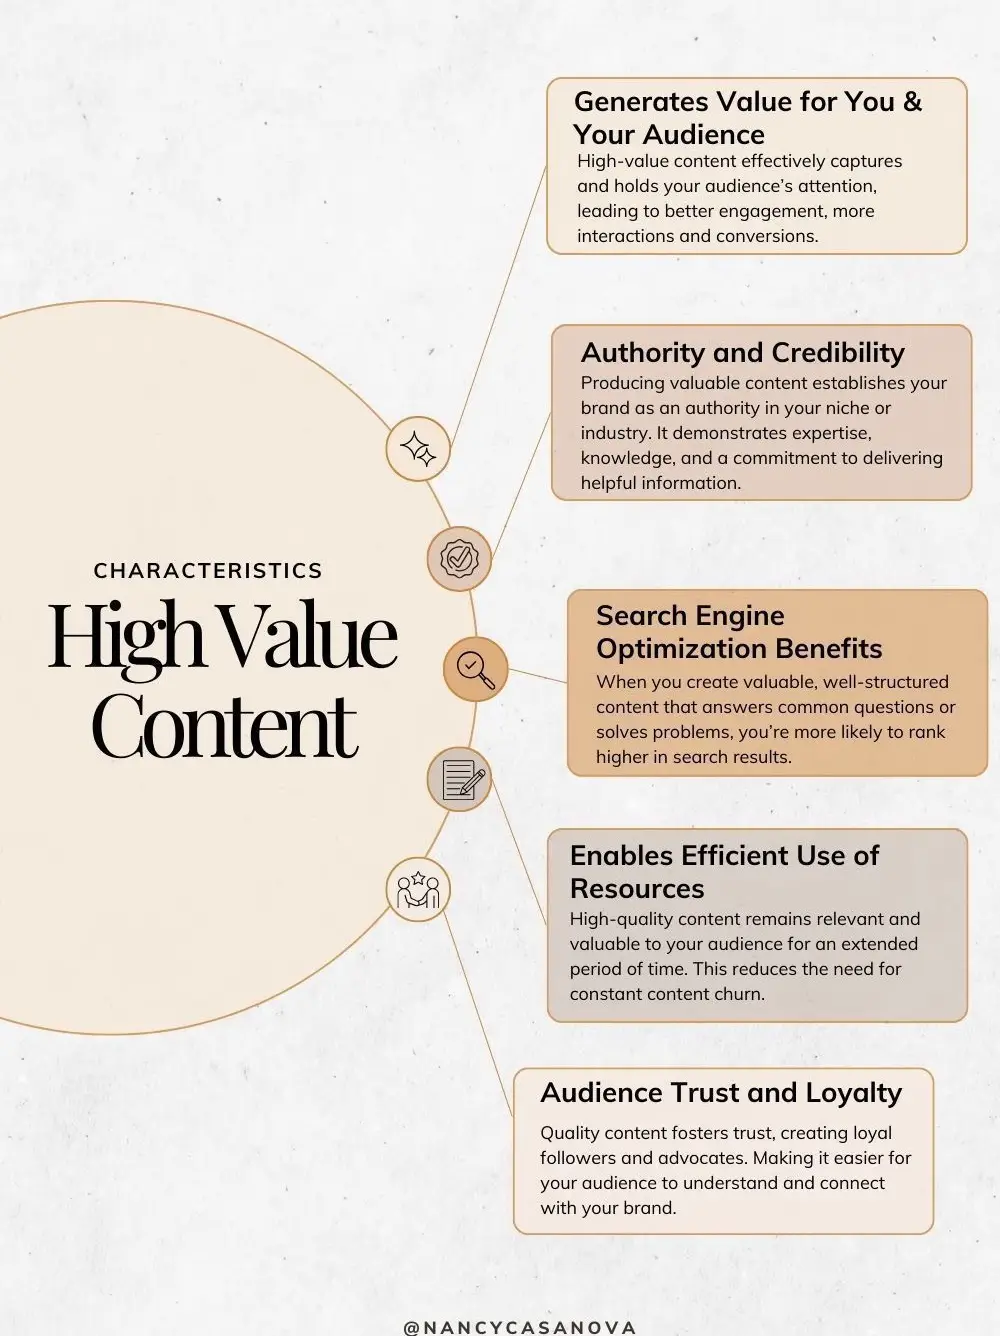  A white background with a blue arrow pointing to the top left. A list of characteristics and benefits of high-quality content.